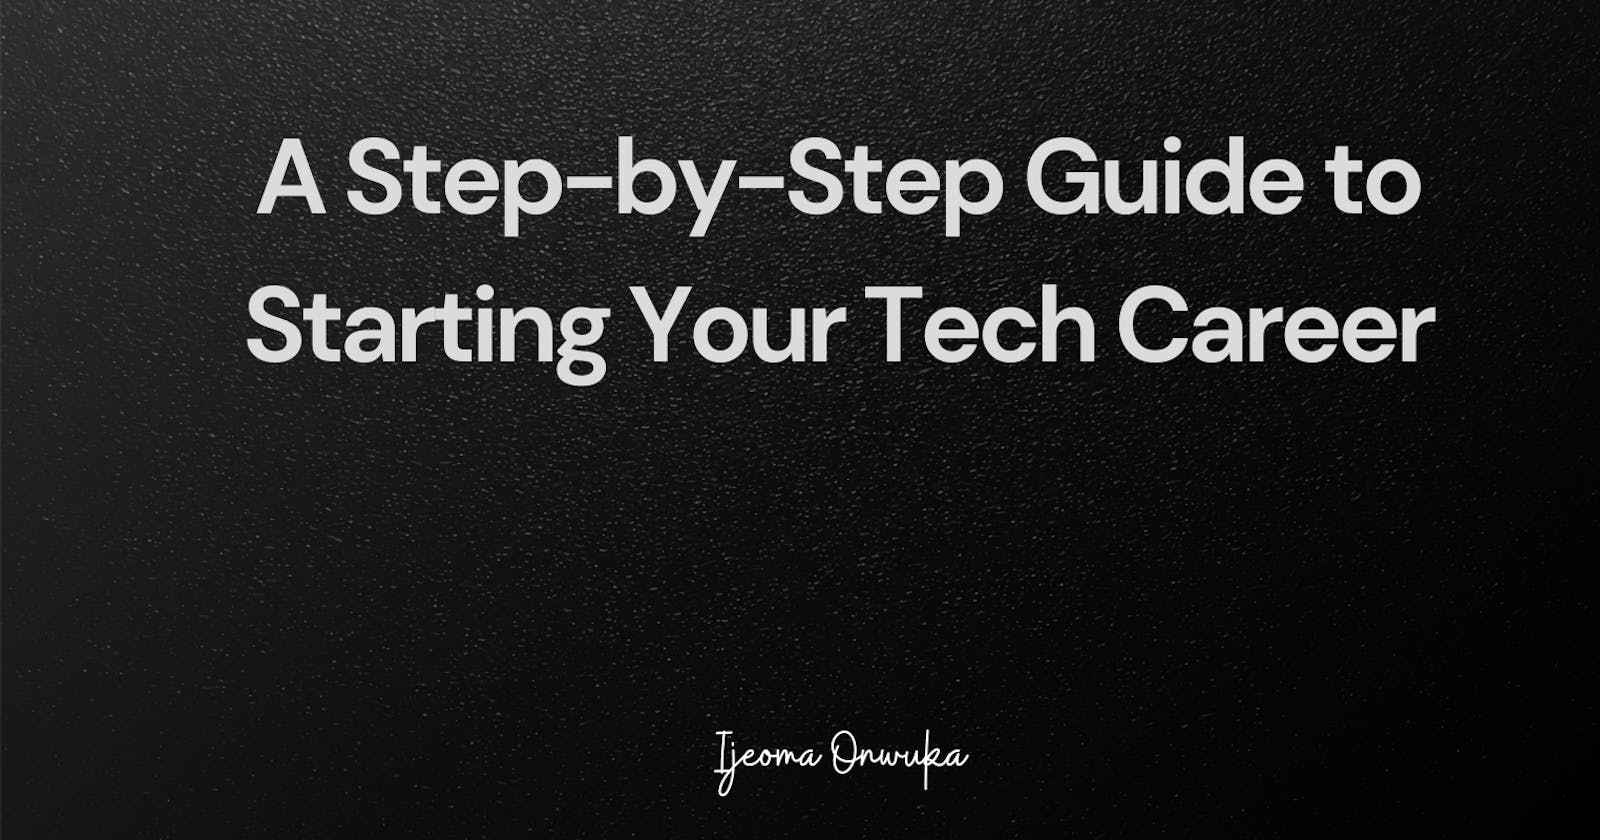 A Step-by-Step Guide to Starting Your Tech Career